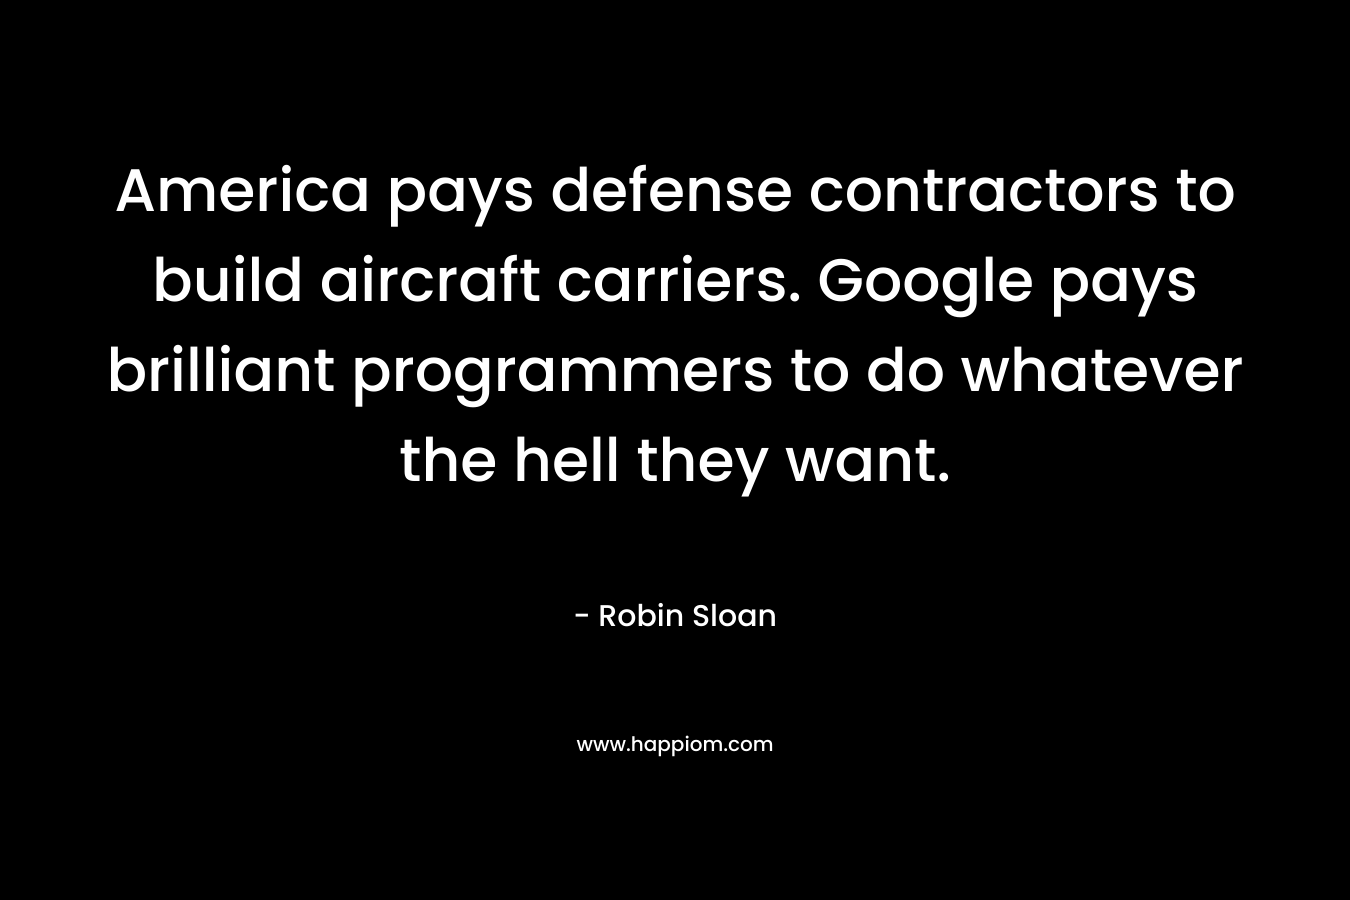 America pays defense contractors to build aircraft carriers. Google pays brilliant programmers to do whatever the hell they want.